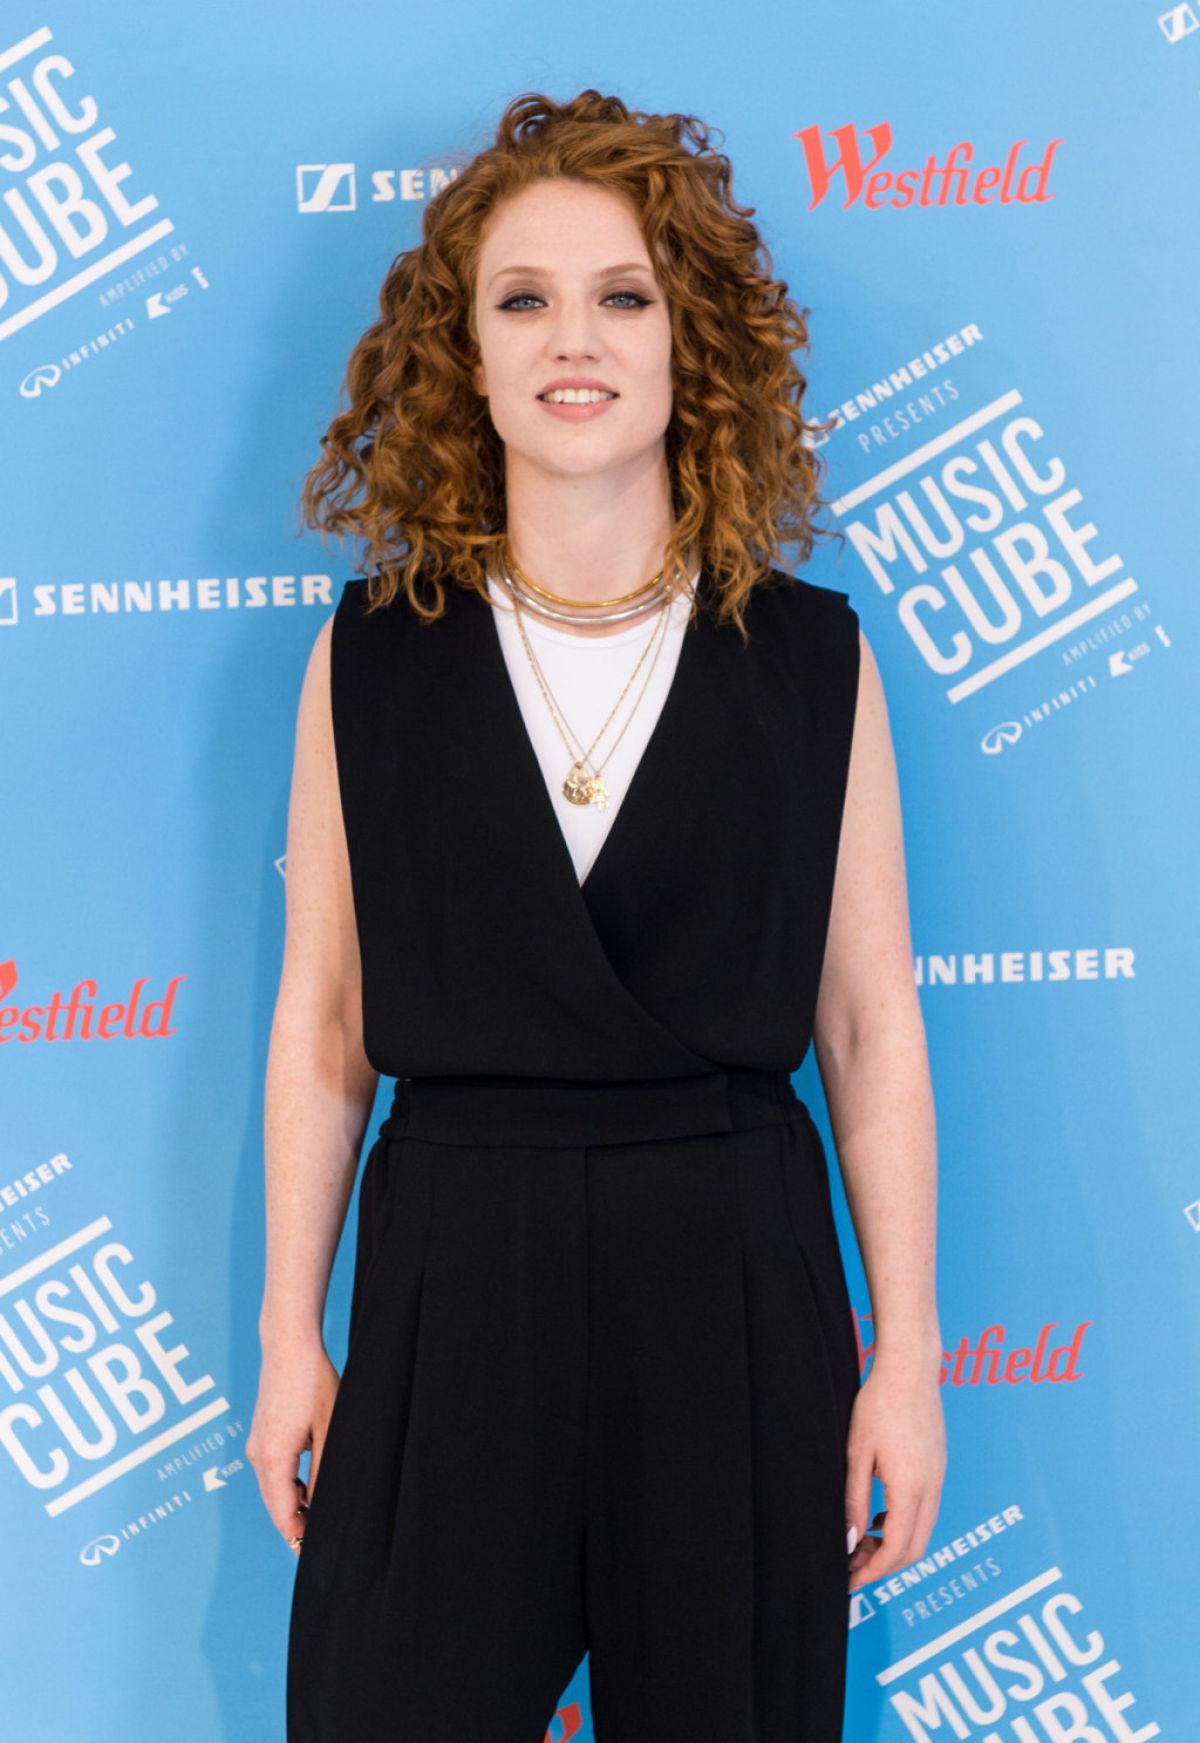 JESS GLYNNE at Launch for Music Cube in London 08/28/2015 – HawtCelebs